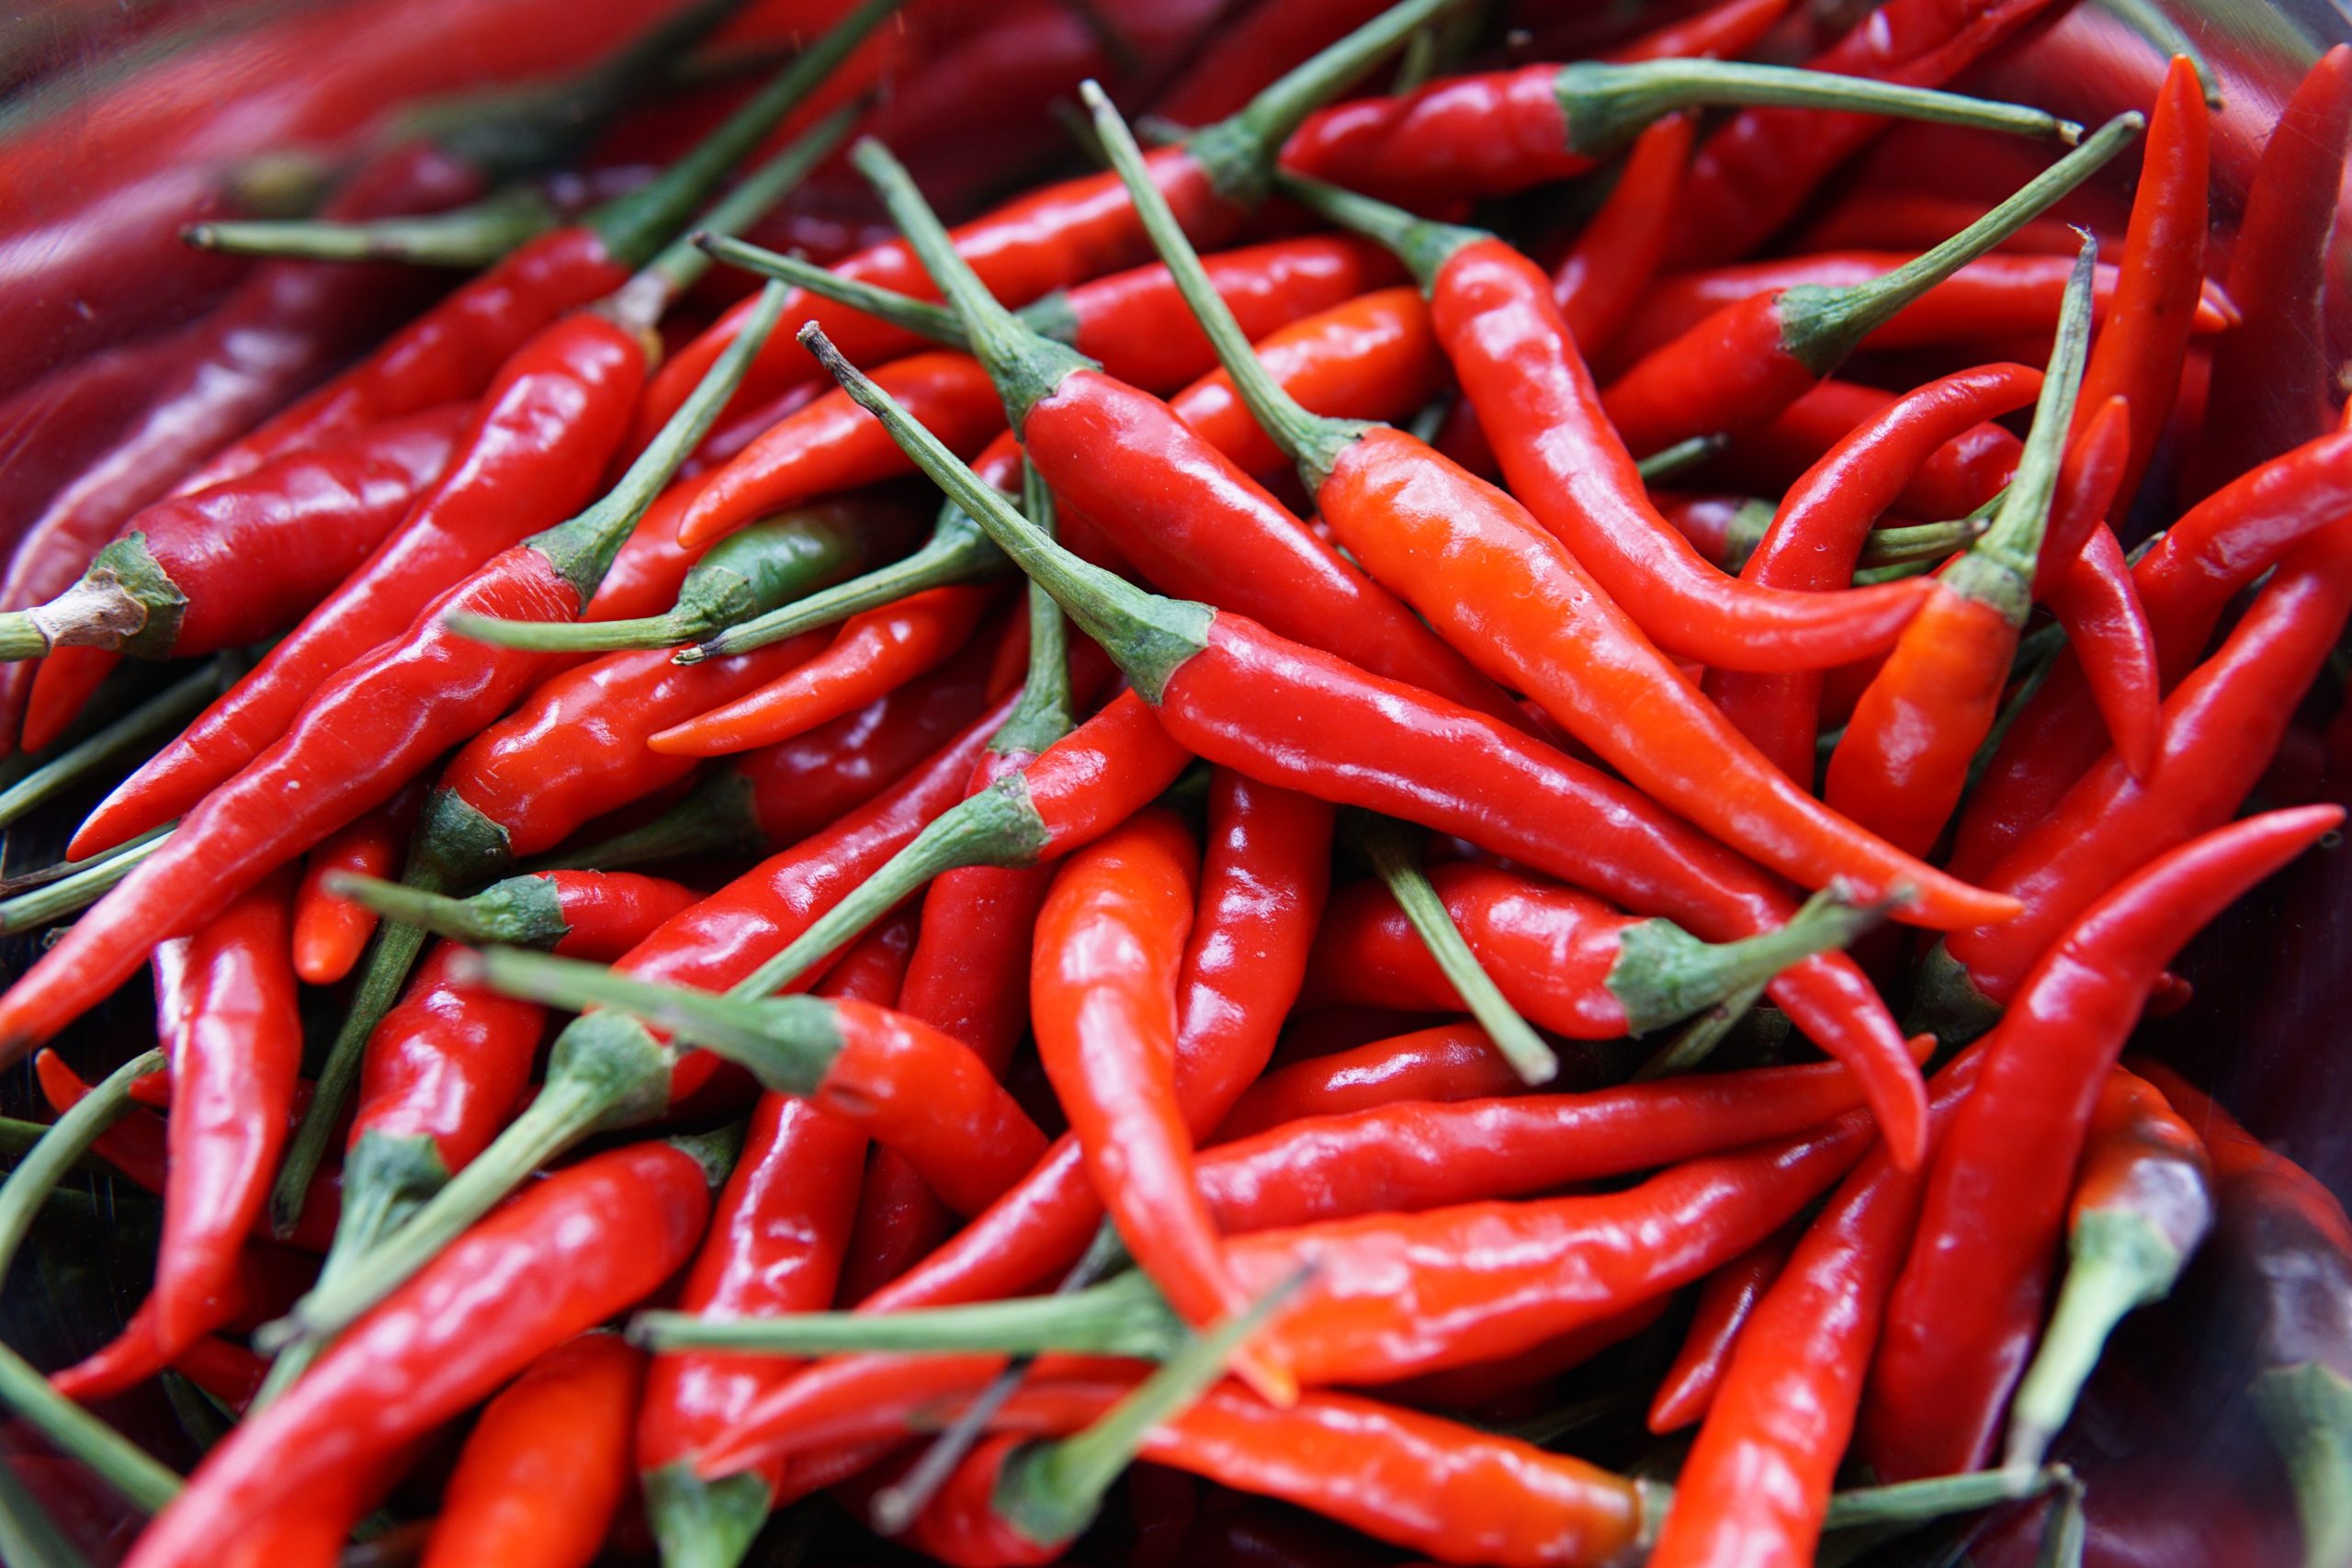 can spicy food cause palpitations?